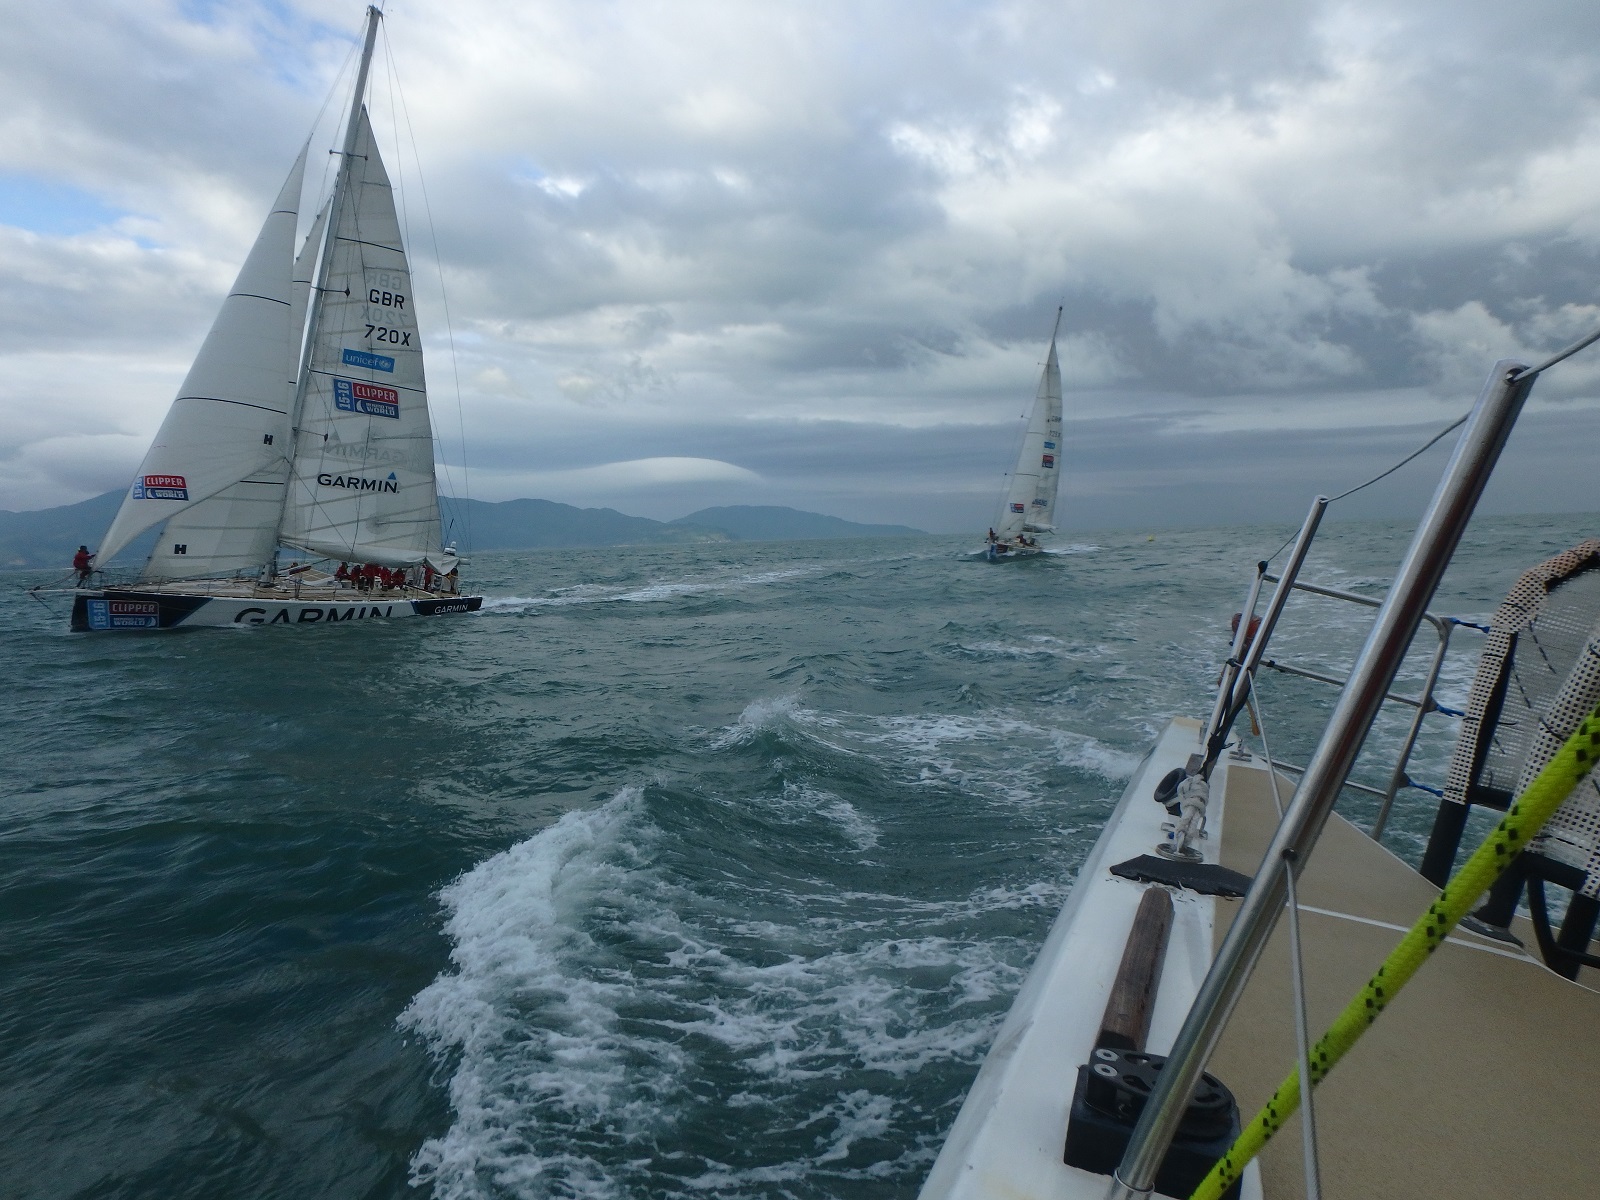 View from IchorCoal at race start of Garmin racing 